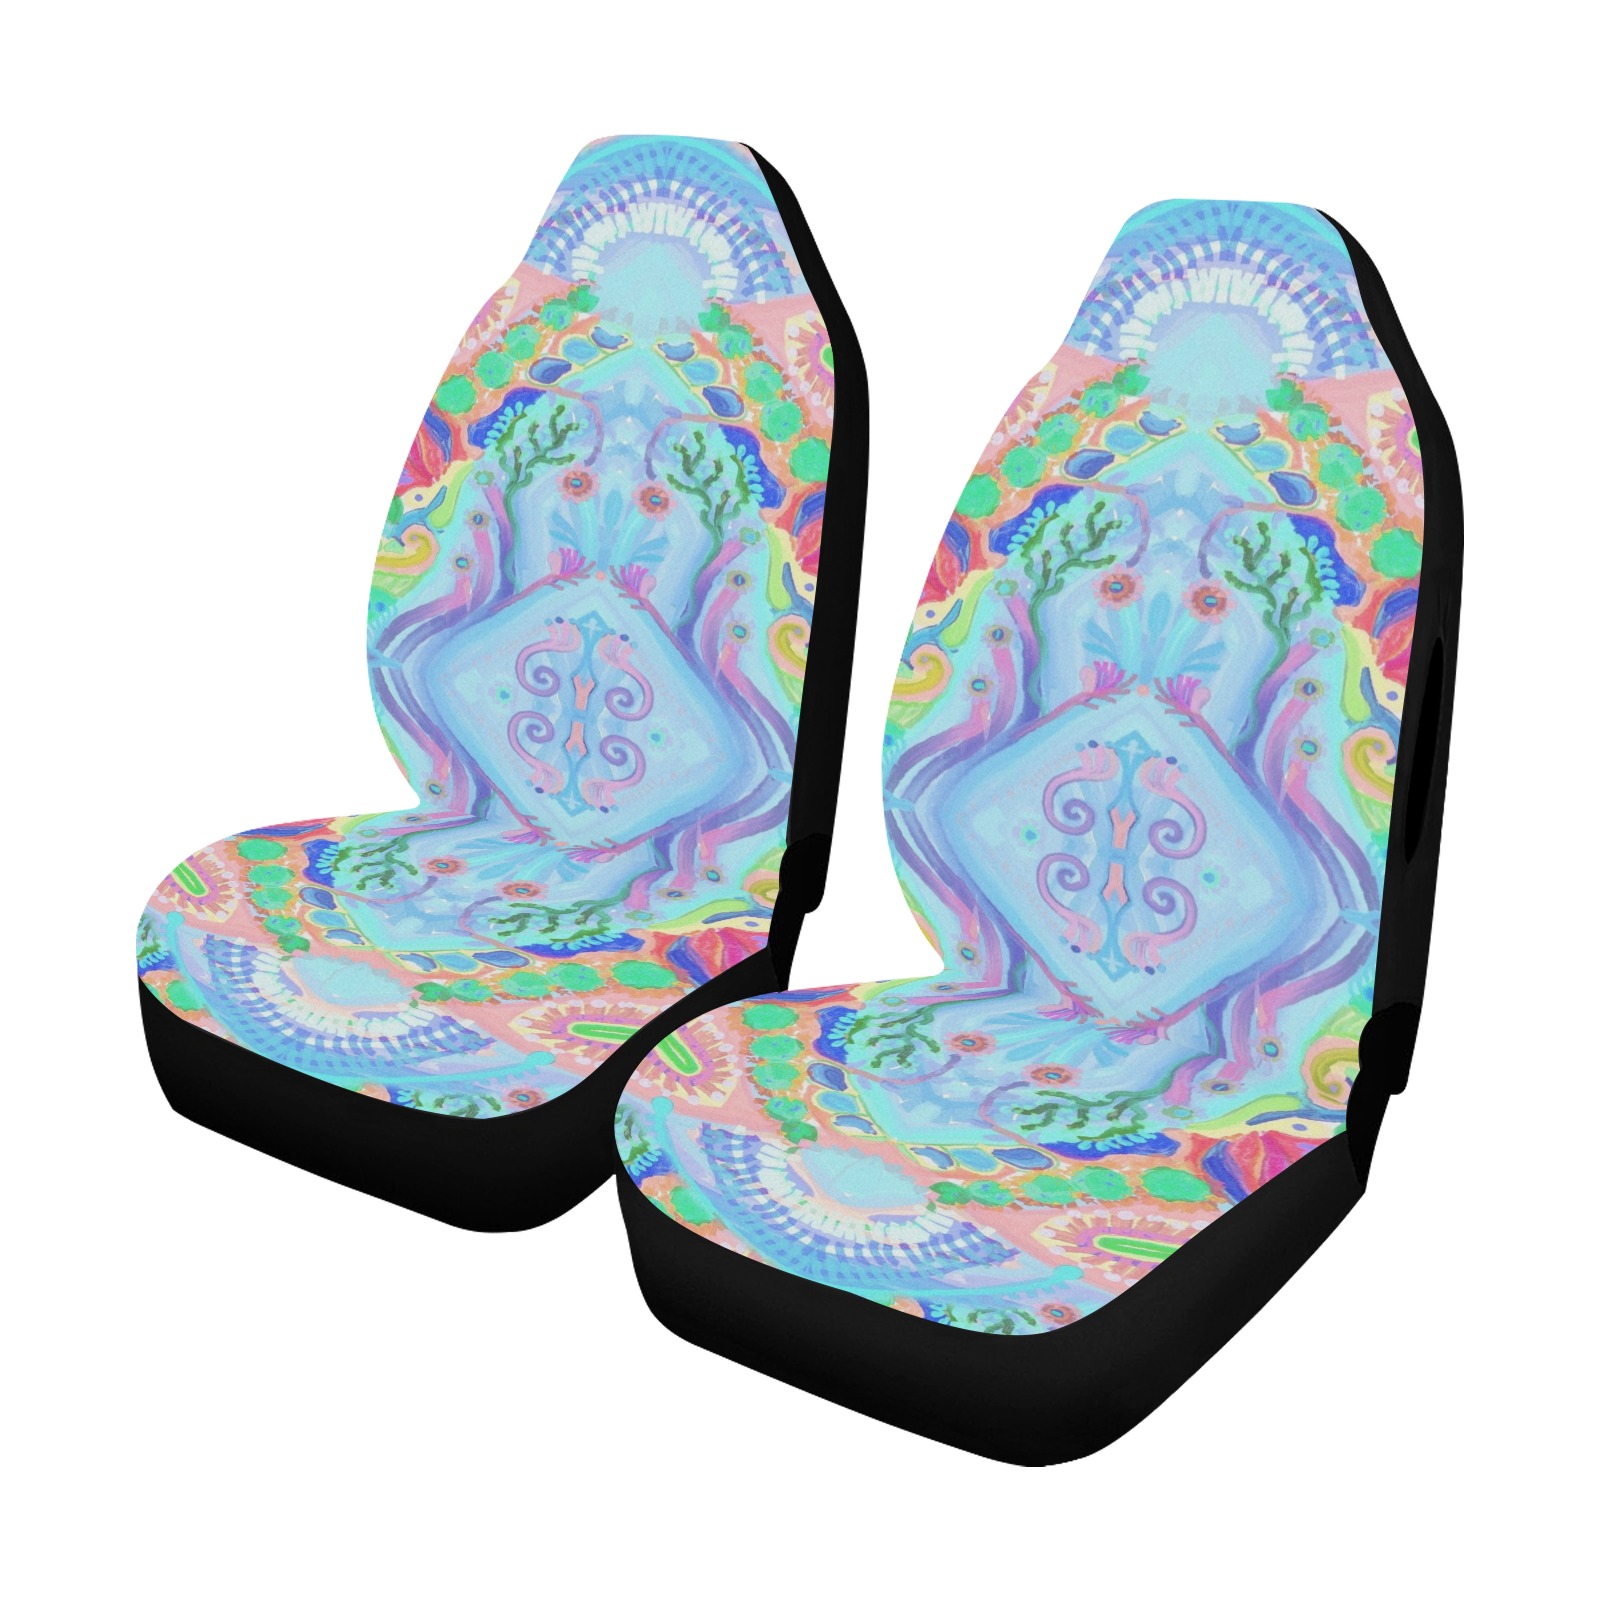 isles2 Car Seat Cover Airbag Compatible (Set of 2)